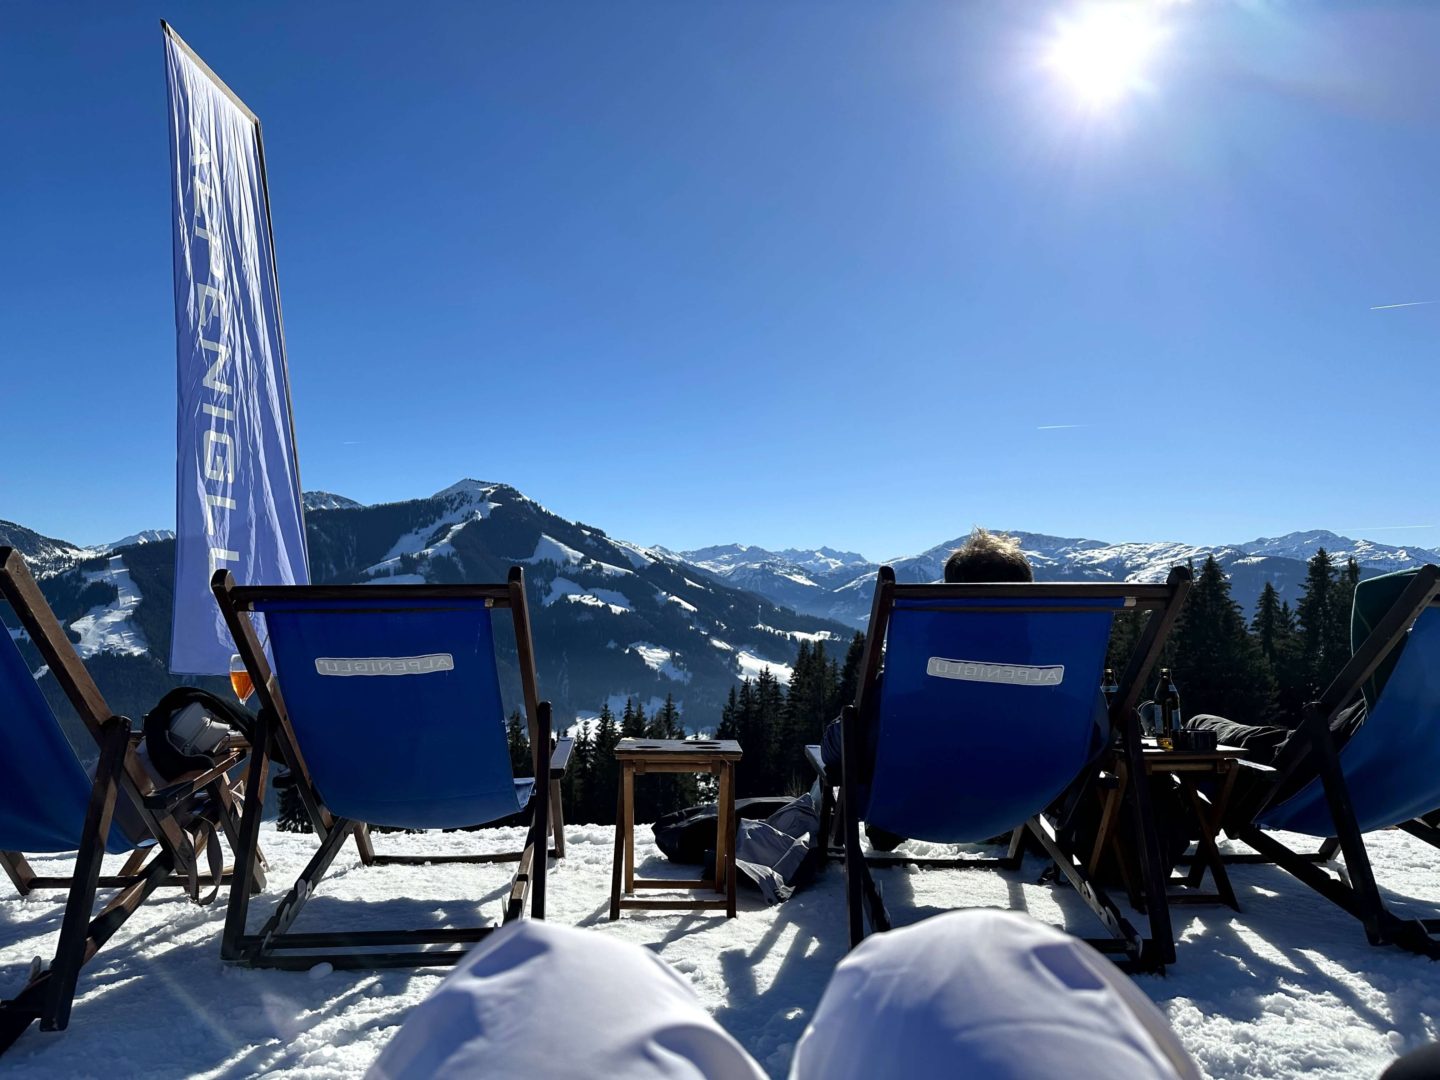 A view of a ski valley from sitting on a deck chair.